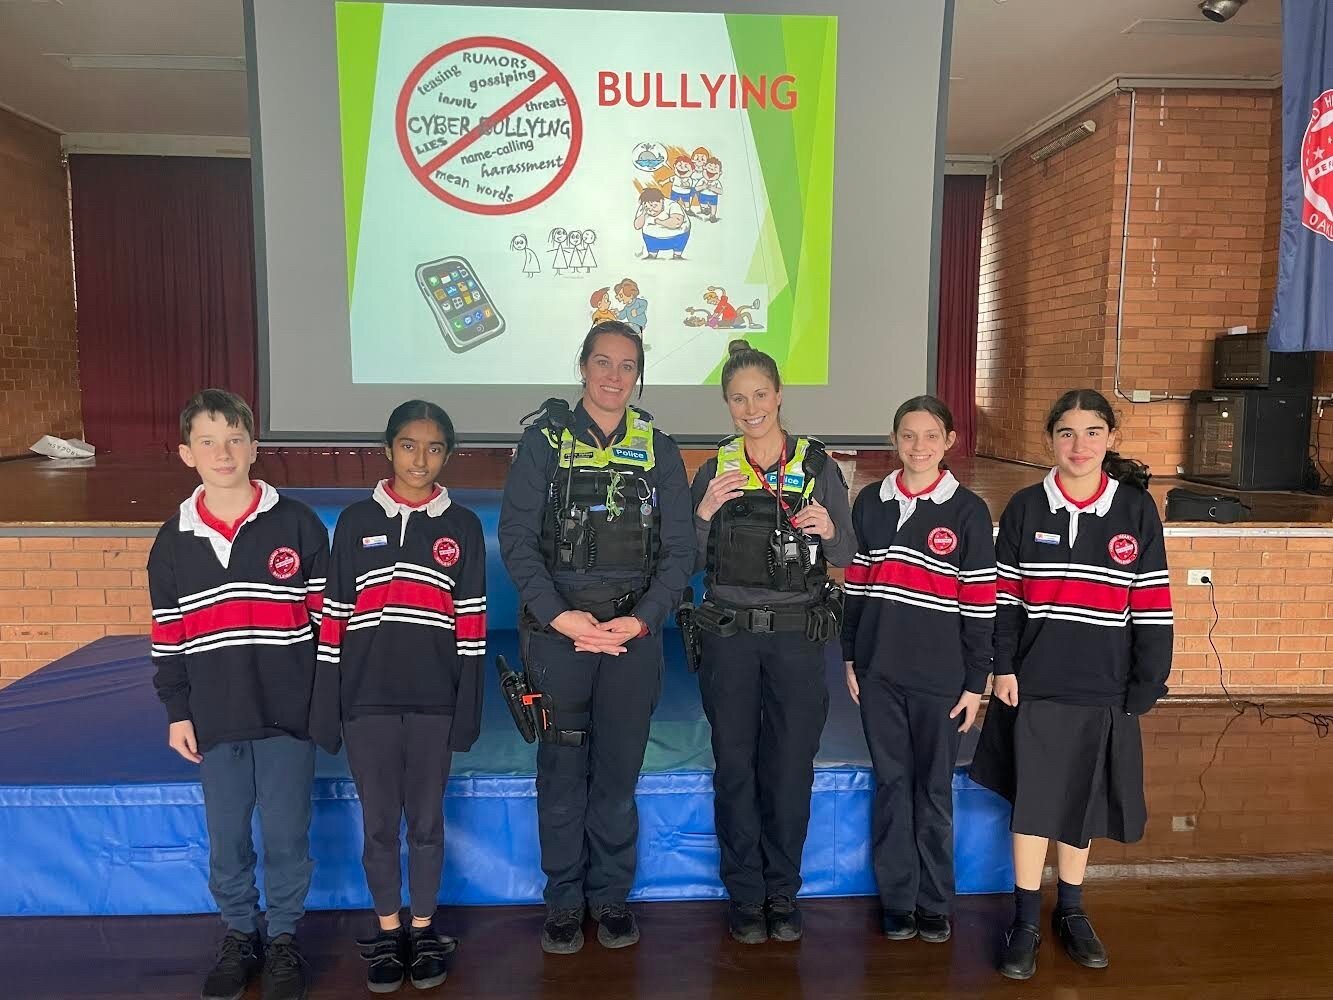 Our level 5/6 students were lucky enough to receive a visit from Senior Constables Jaclyn and Sonia, our local community police officers. 👮&zwj;♀️👮&zwj;♂️They took part in a wonderful workshop where they learned about bullying, online safety and wh